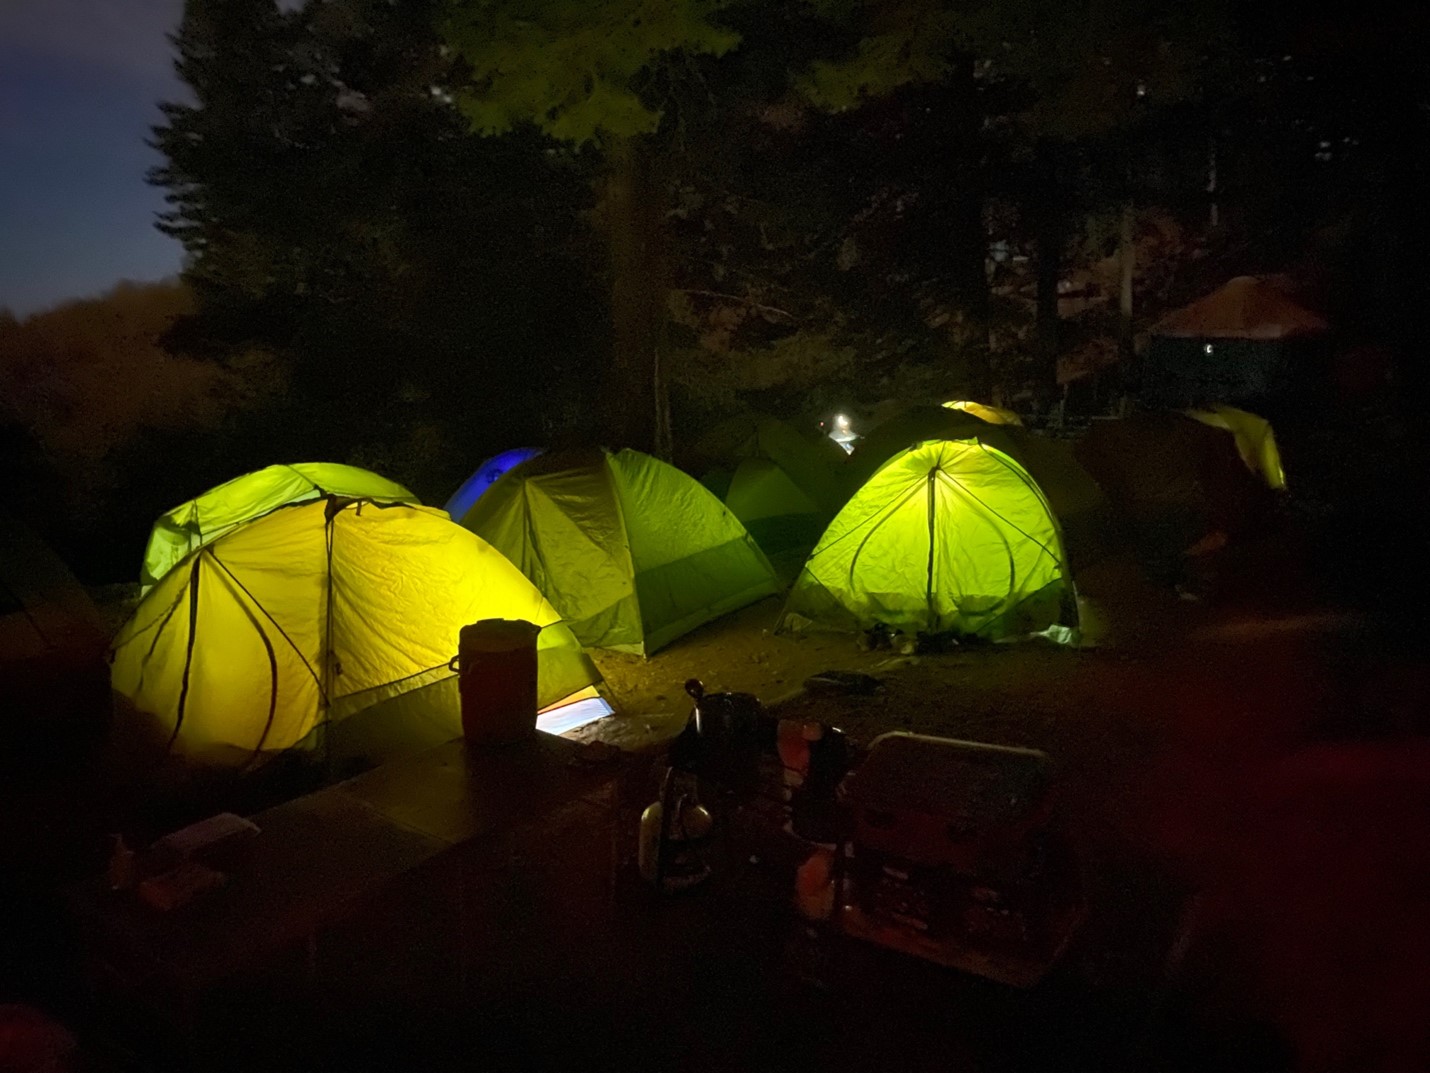 The camping pad at Lucky Peak after dark is crowded with tents. The light of flashlights inside each tent gives off a cheery glow